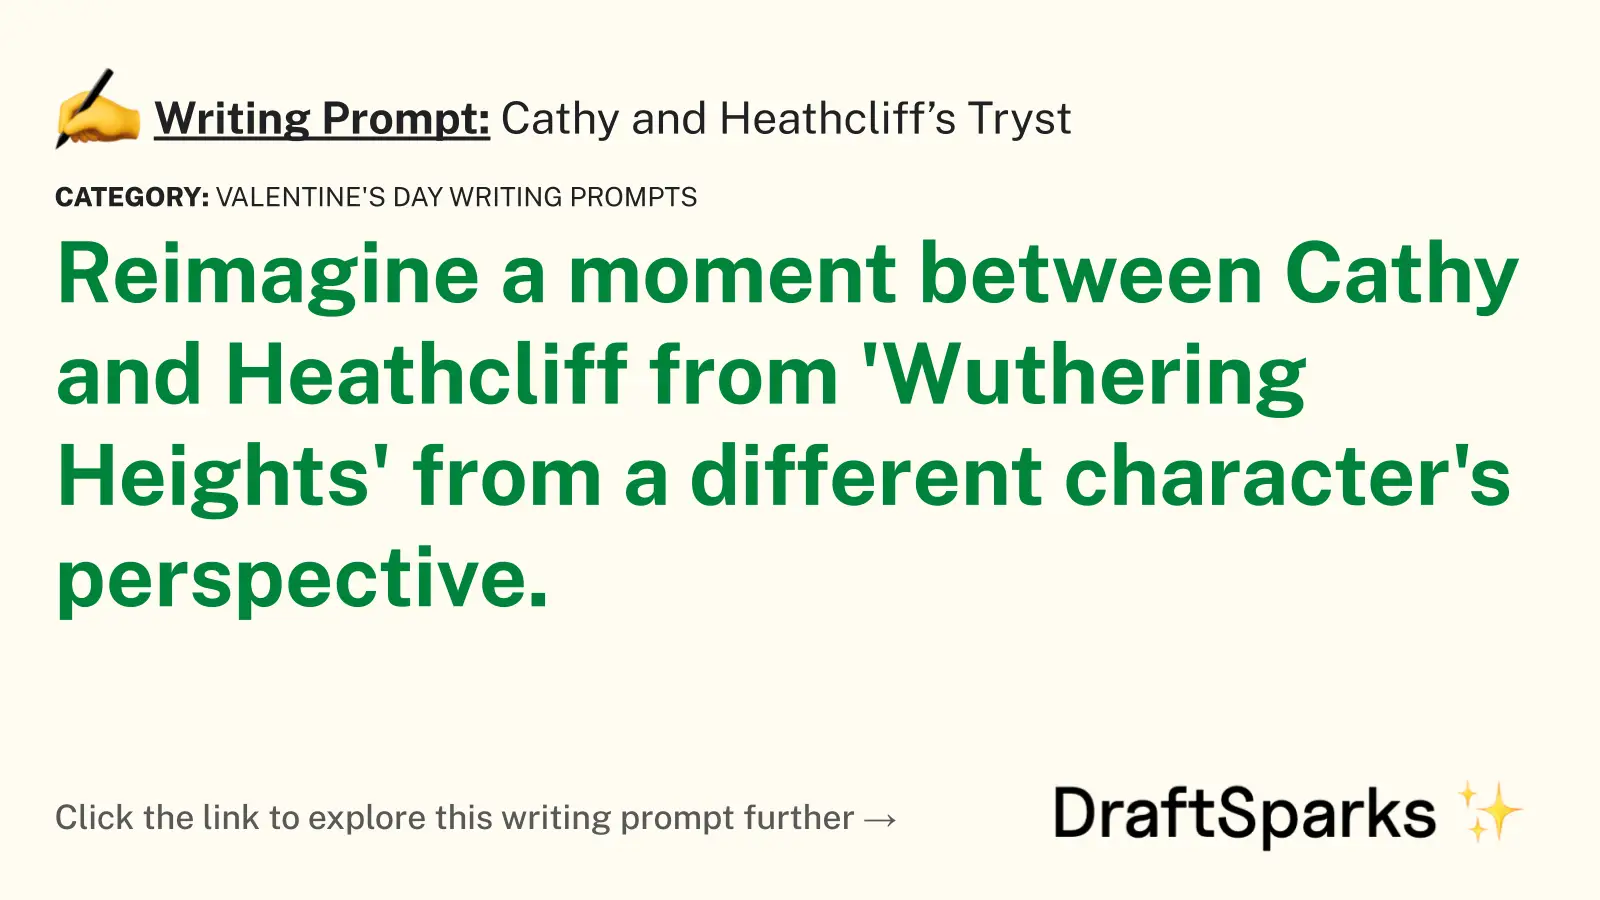 Cathy and Heathcliff’s Tryst